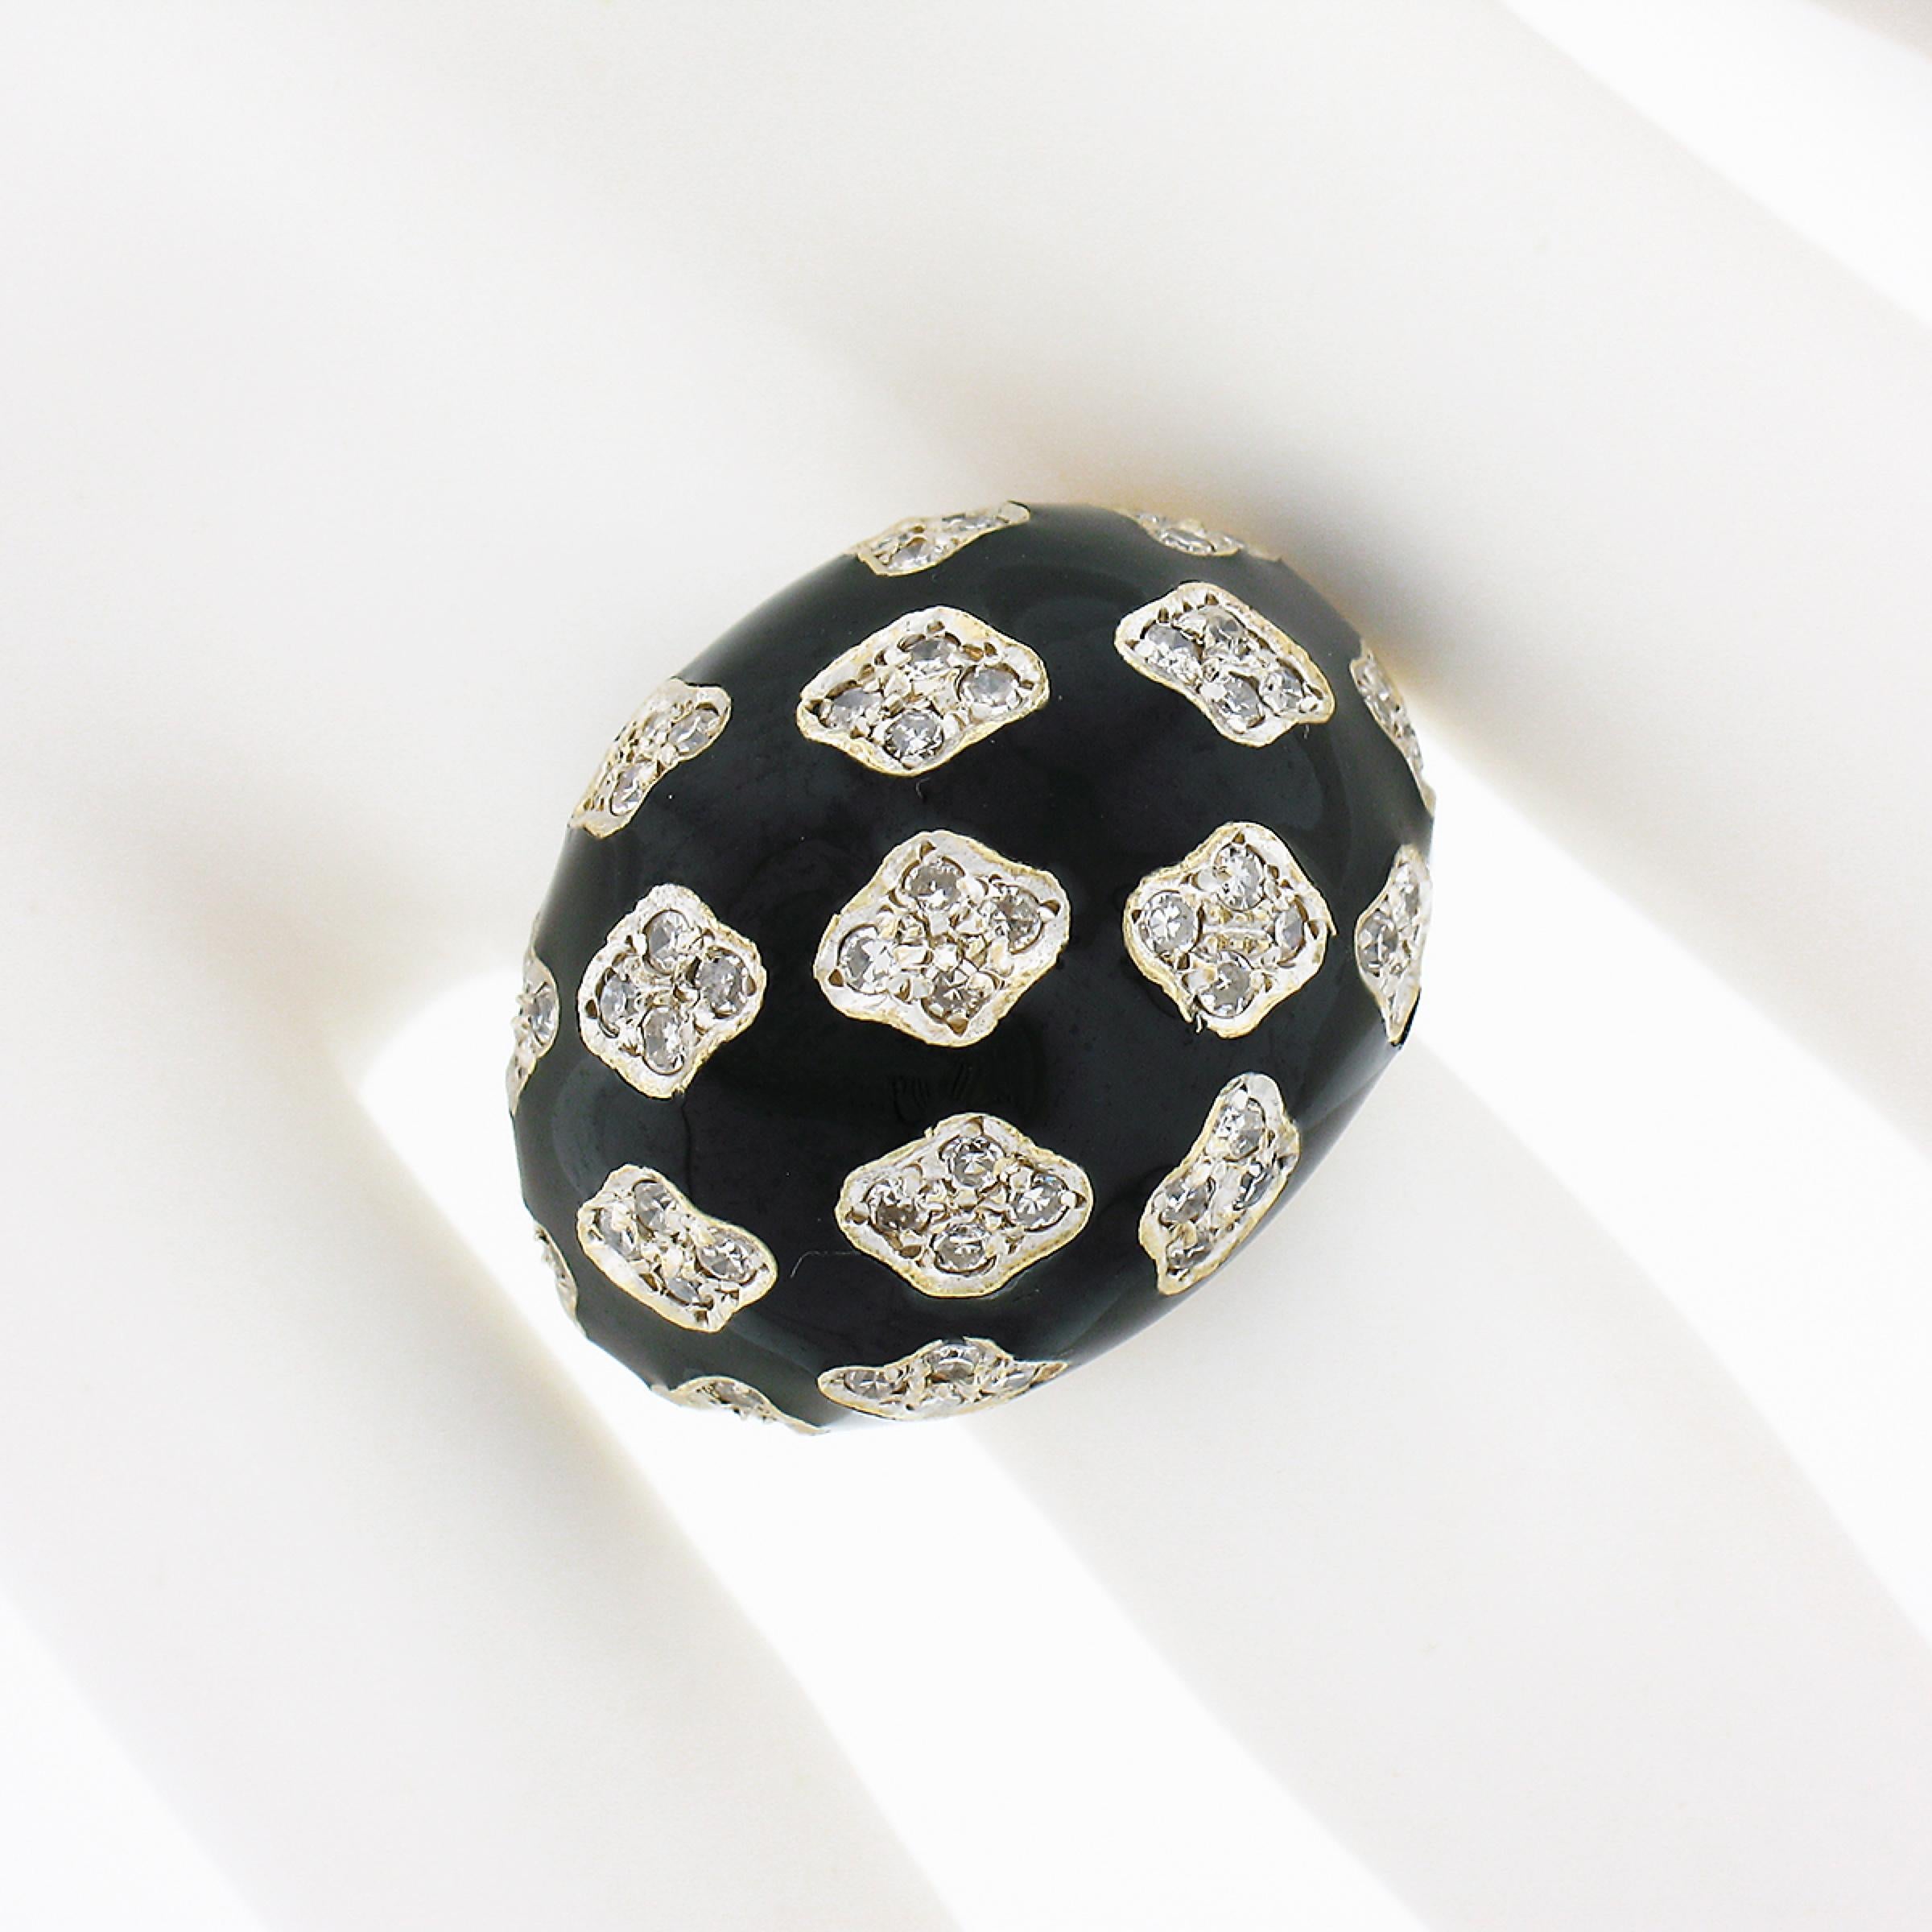 Vintage 18k TT Gold 0.90ct Pave Diamond Clusters on Black Enamel Dome Bombe Ring In Good Condition For Sale In Montclair, NJ